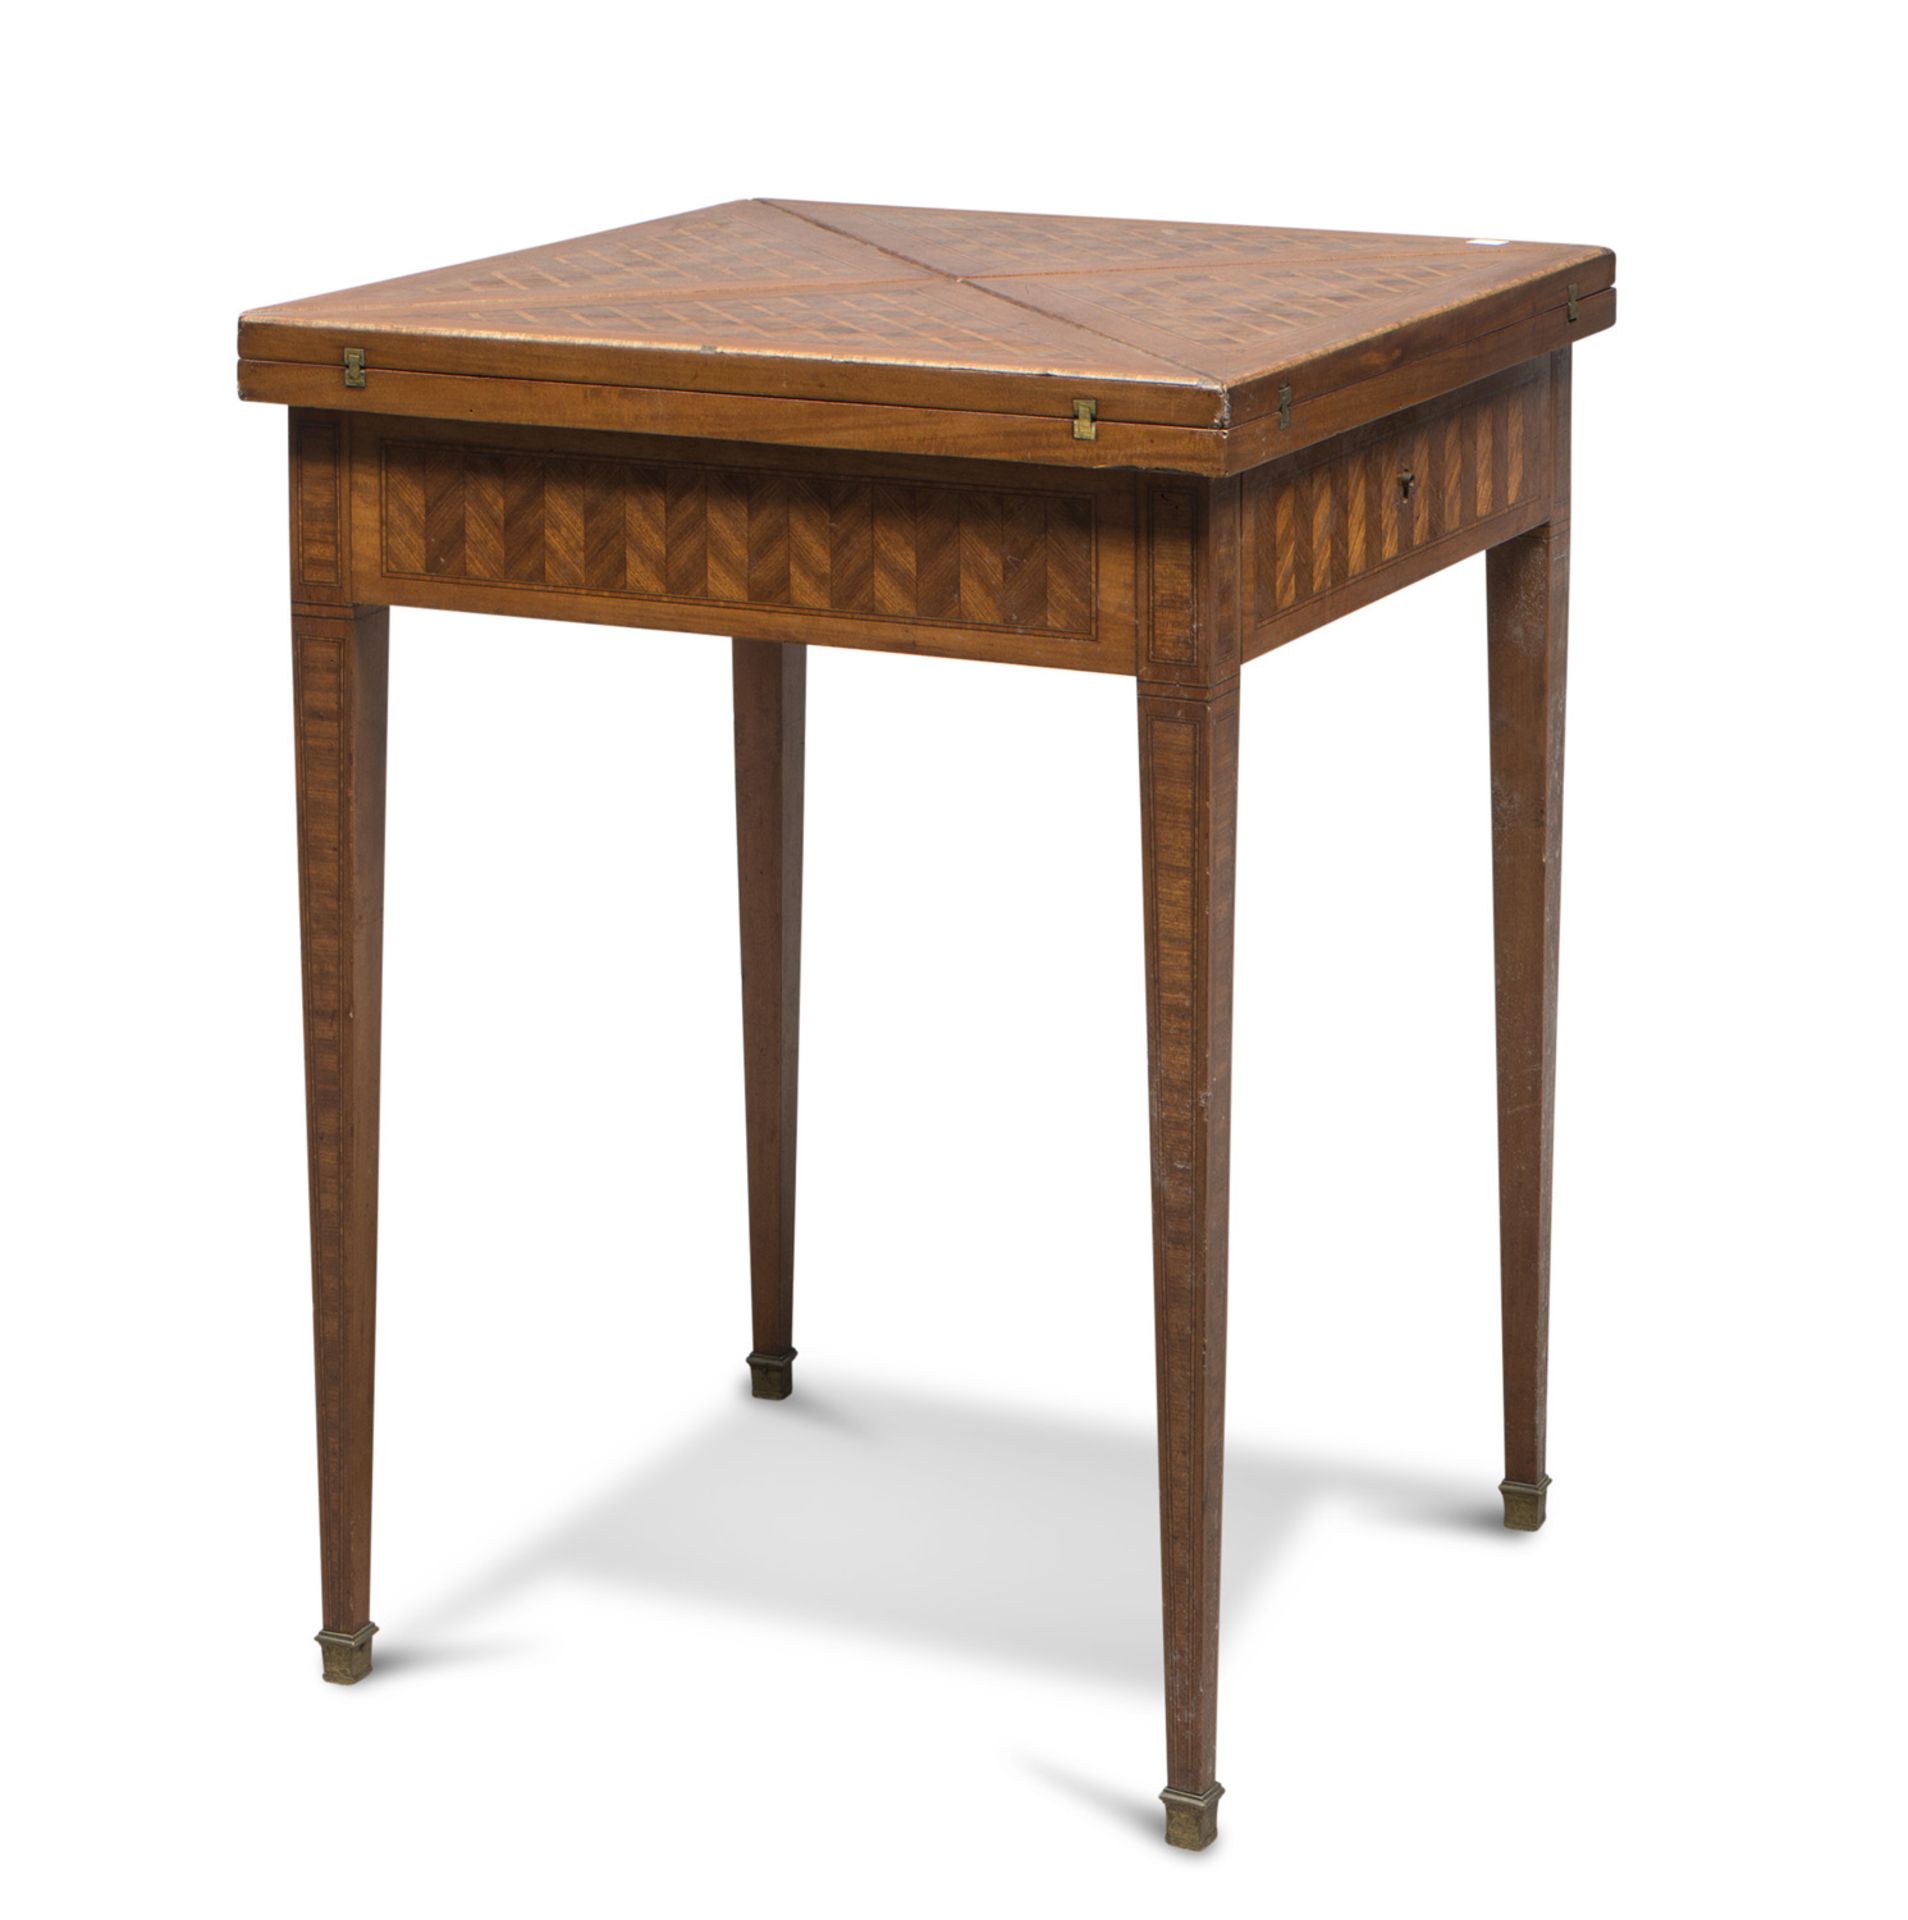 HANDKERCHIEF CARD TABLE, 19TH CENTURY veneered in maple trees and rosewood. A drawer in the apron,